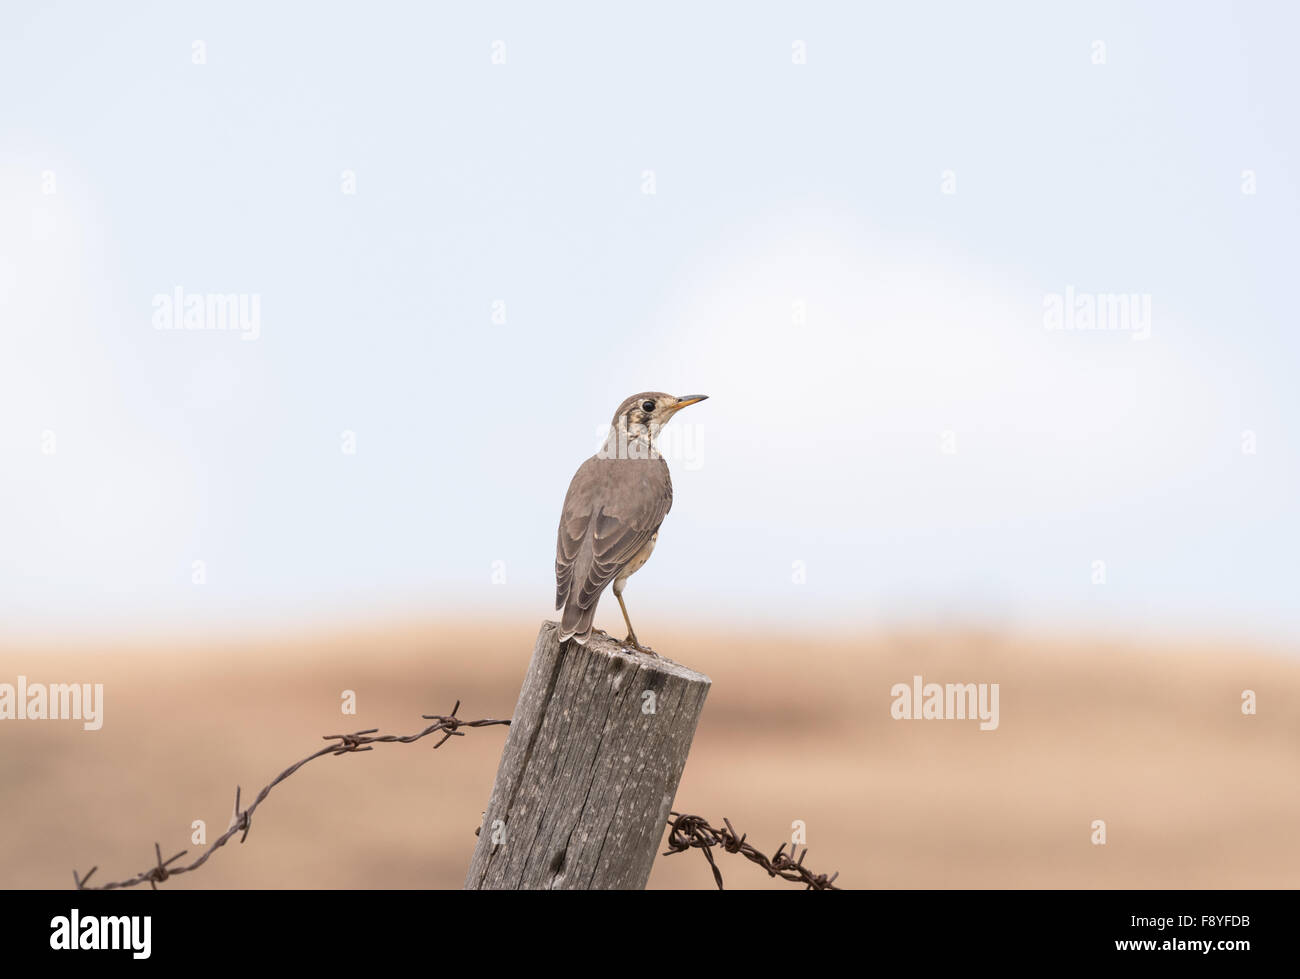 An Abyssinian Longclaw perched on a fence post in the Jemma Valley, Ethiopia. An Ethiopian endemic bird Stock Photo